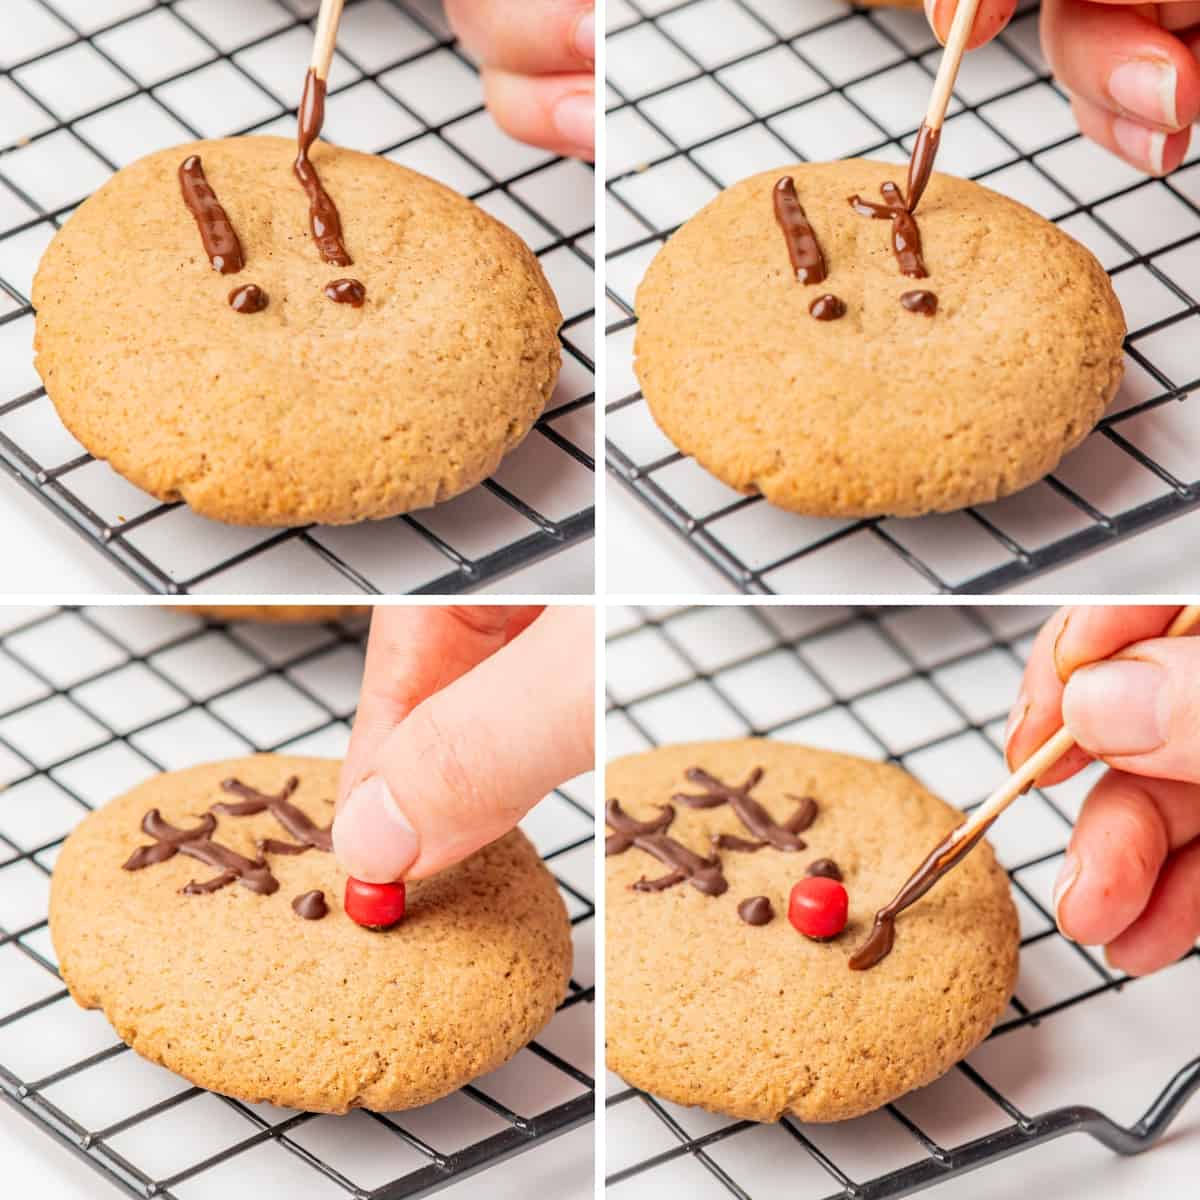 Decorating cookies with a toothpick.